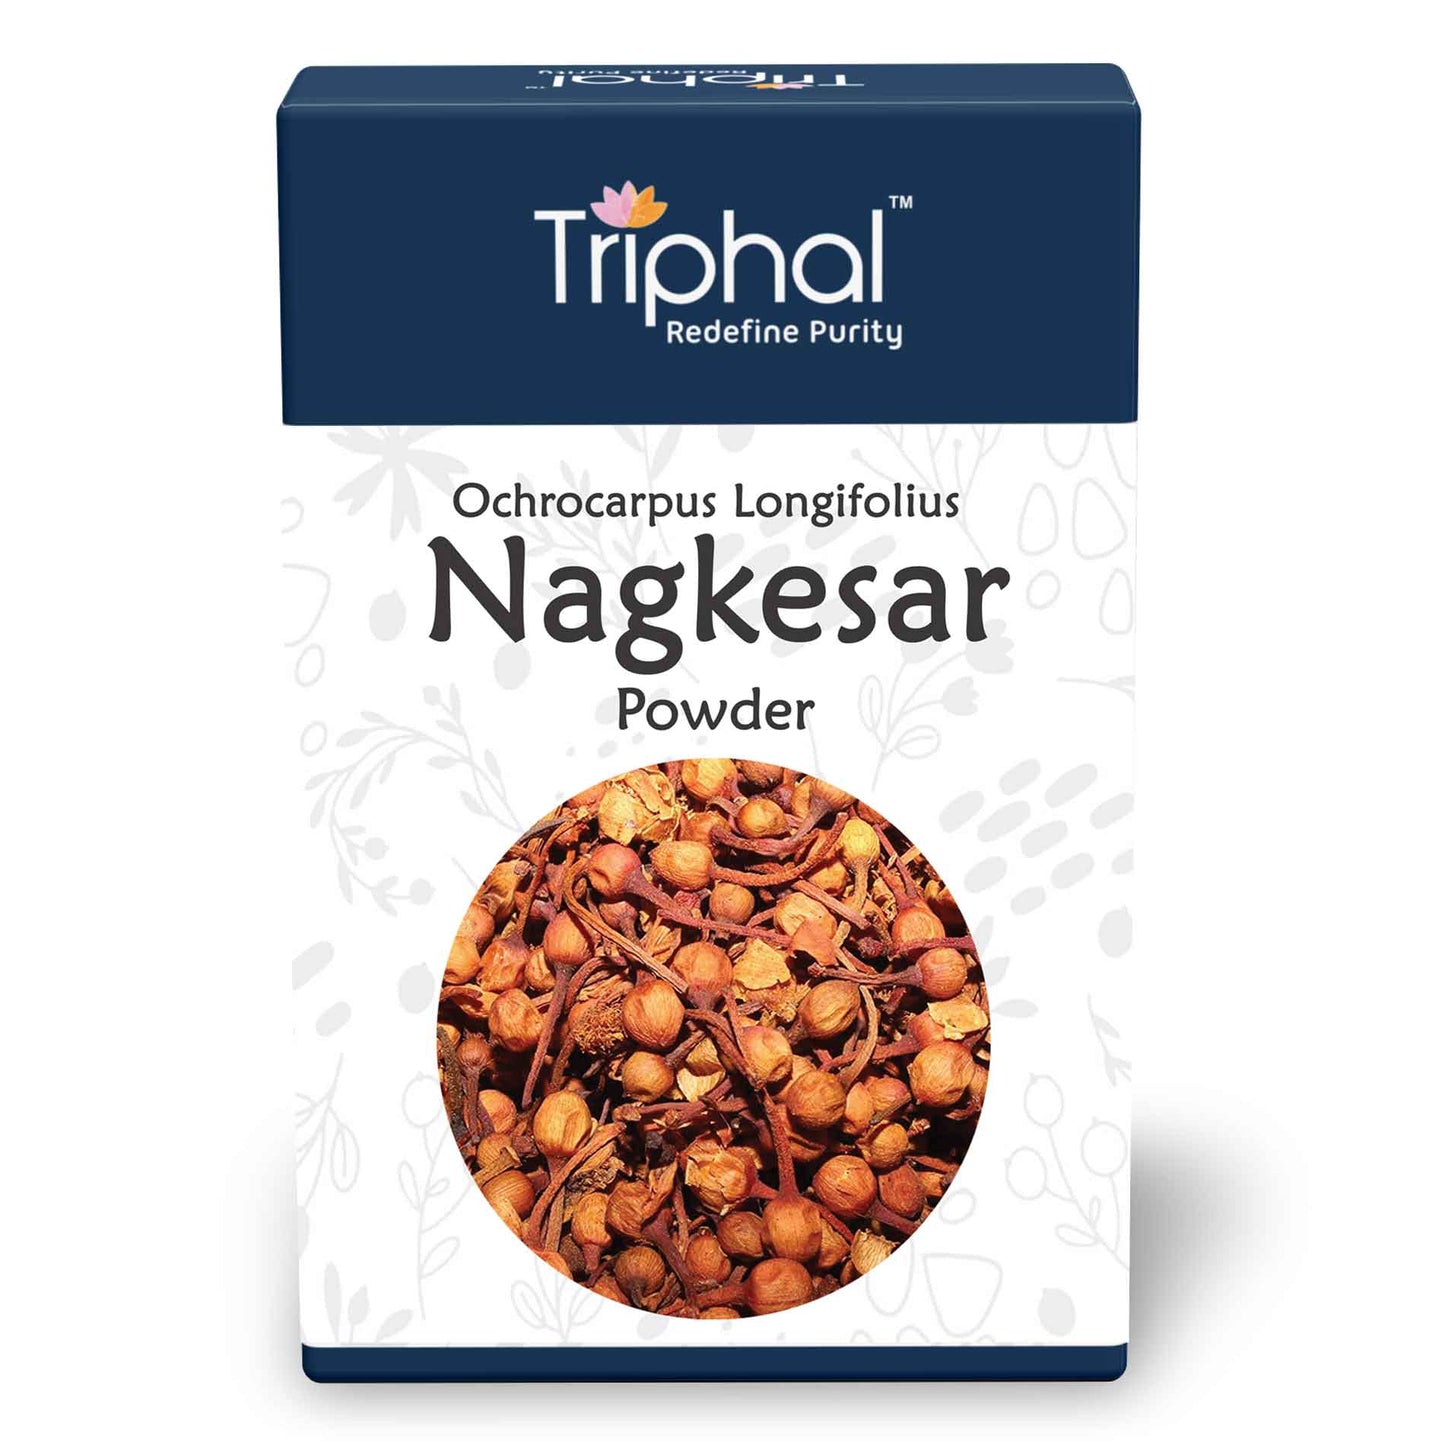 Triphal's Nagkesar powder, made from high-quality handpicked herbs for maximum benefits